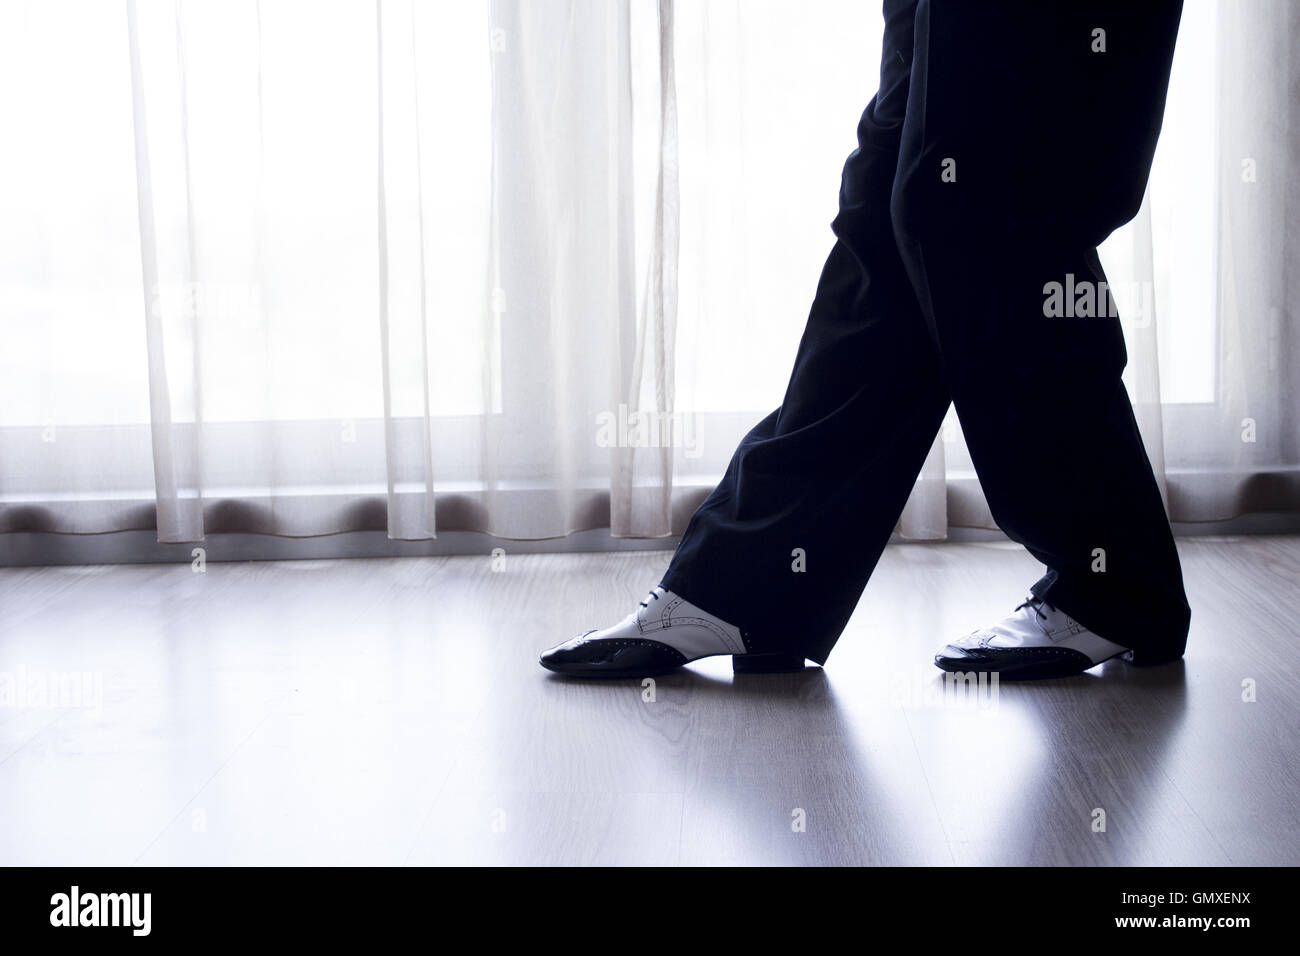 Black and white male dancing shoes Stock Photo - Alamy